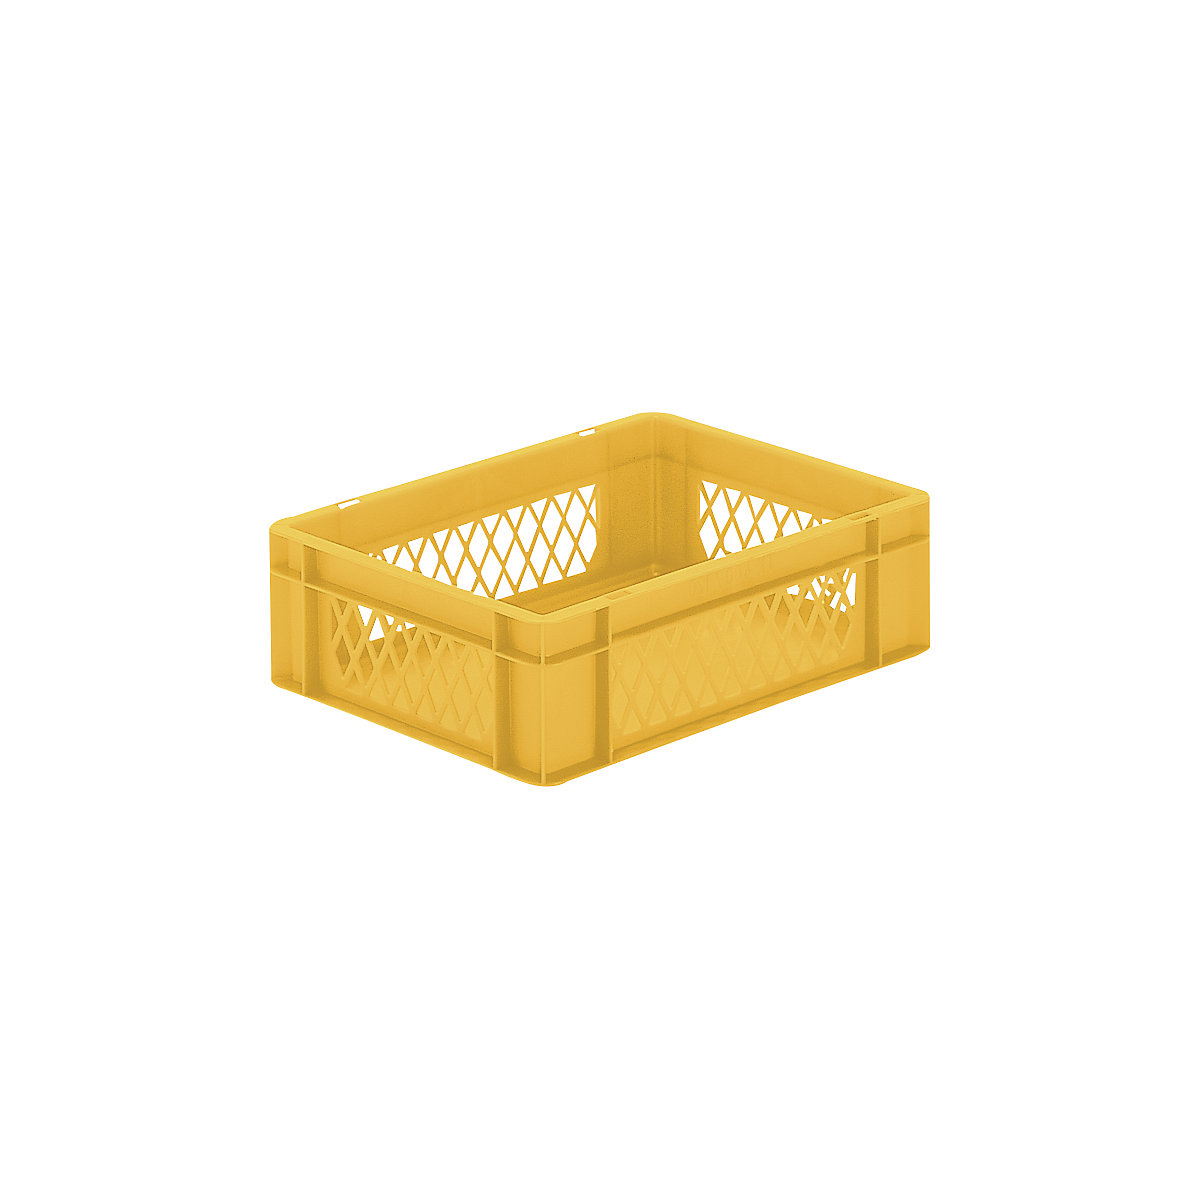 Euro stacking container, perforated walls, closed base, LxWxH 400 x 300 x 120 mm, yellow, pack of 5-5